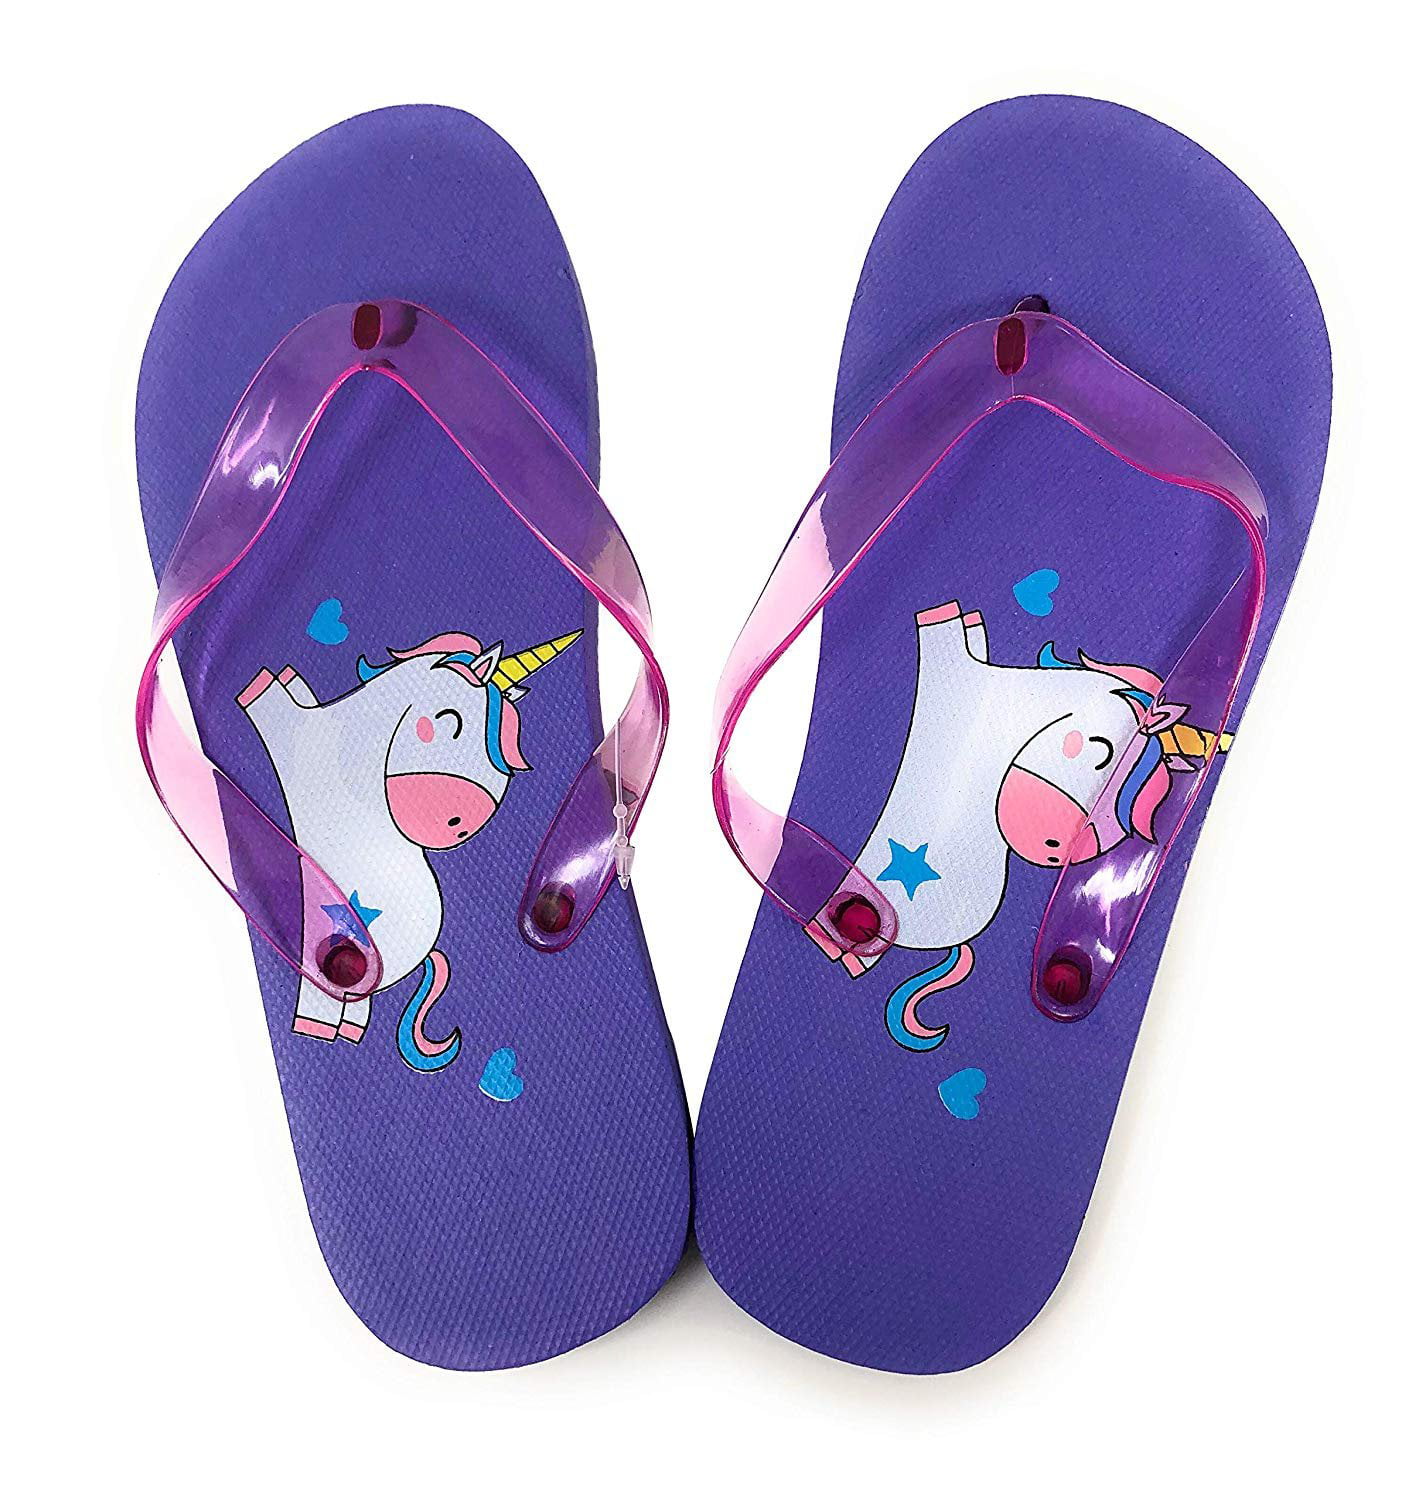 Unicorn Riding A Shark Slippers for Boy Girl Indoor Outdoor Casual Sandals Shoes